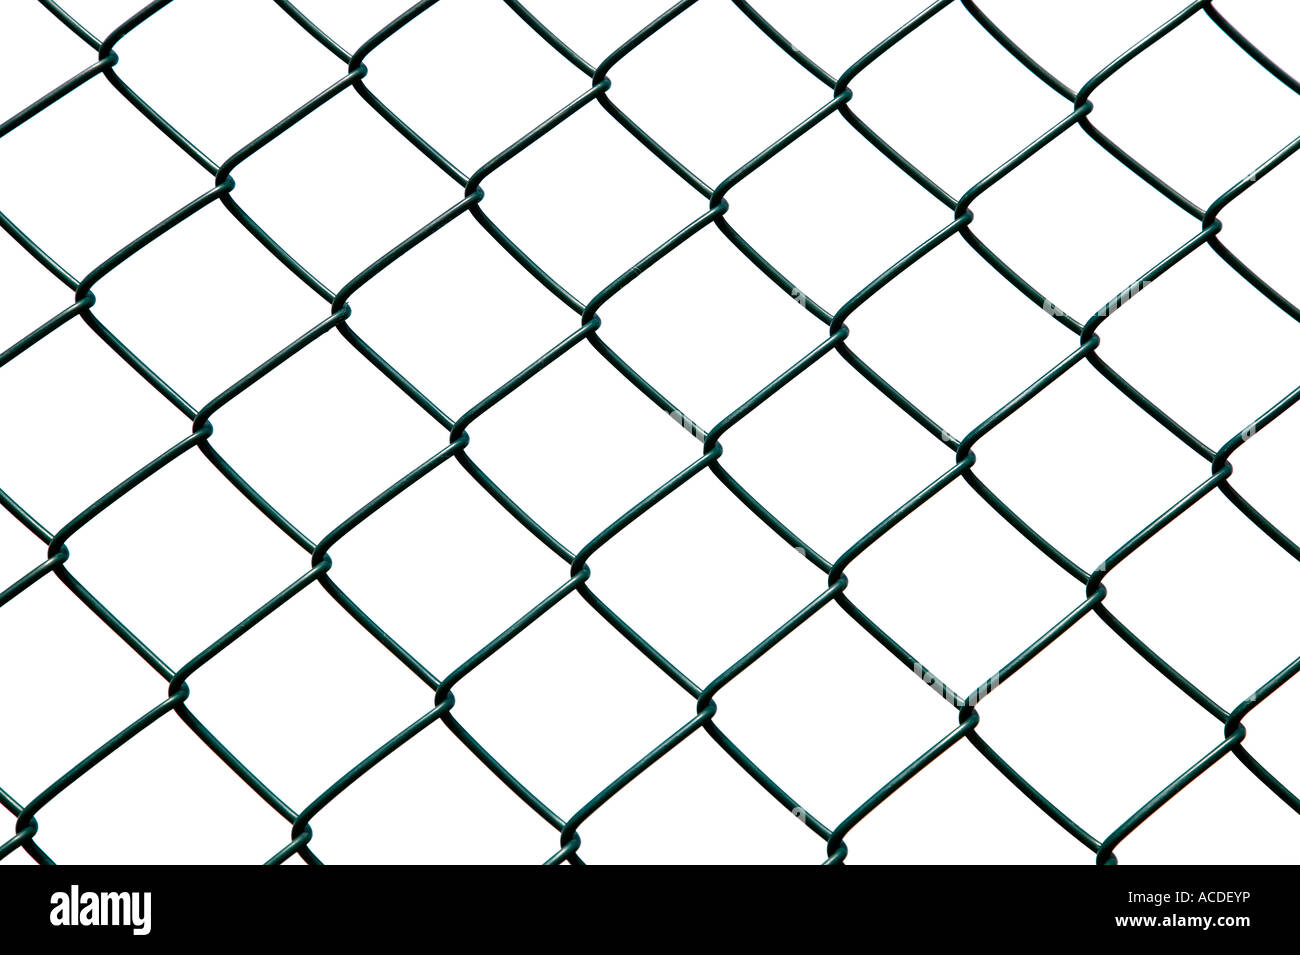 Chainlink fence isolated against a white background Stock Photo